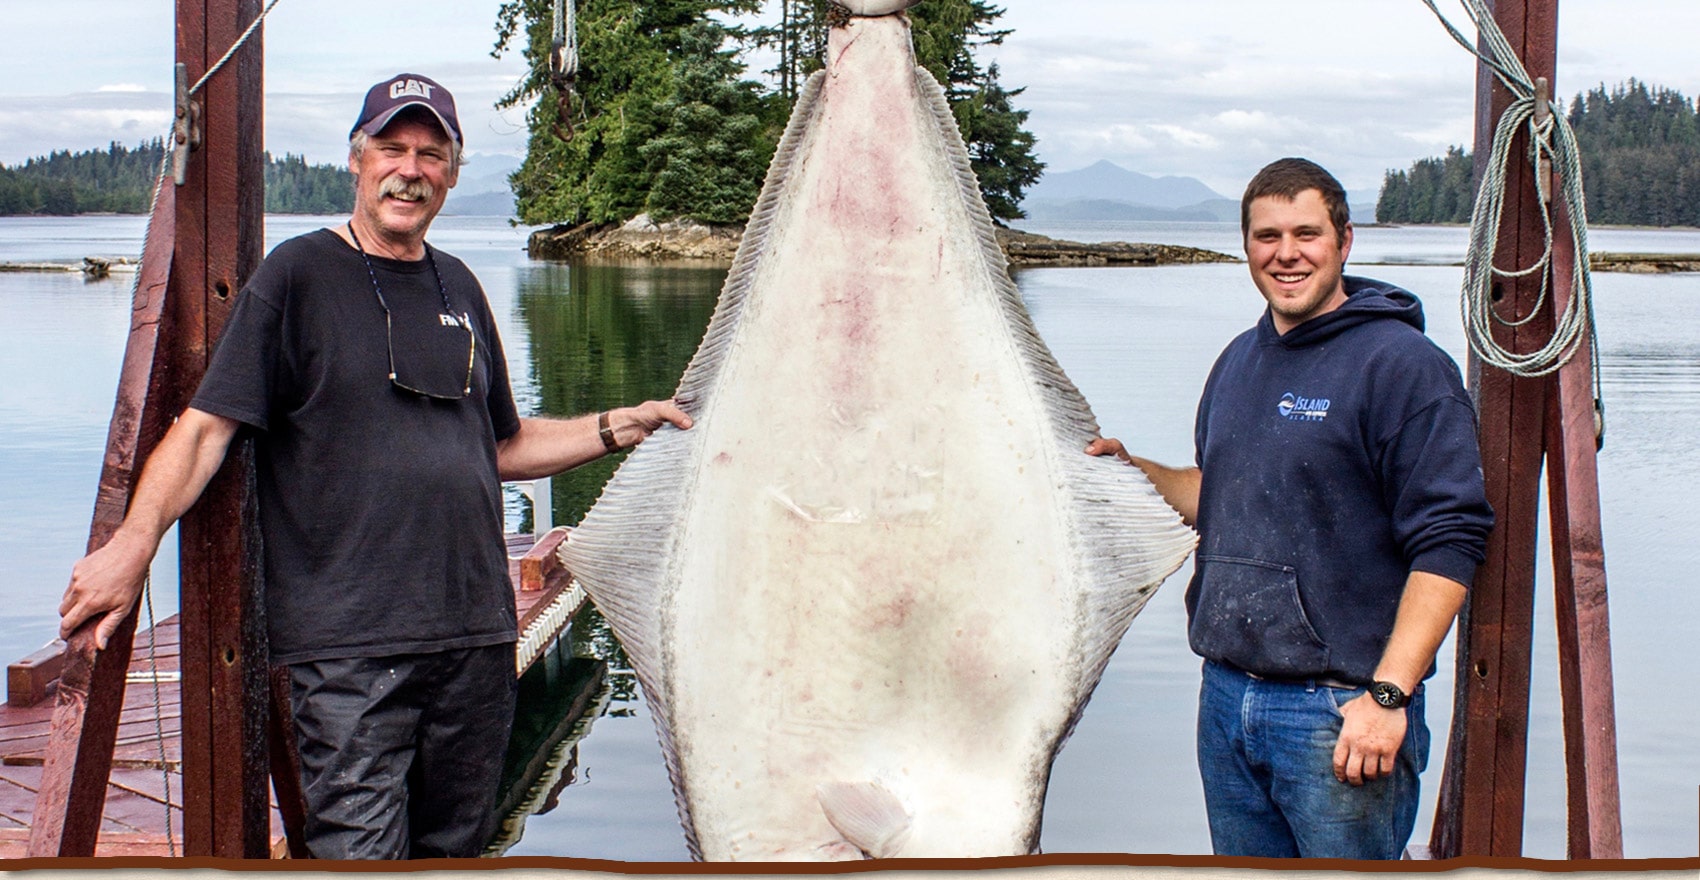 Guests at the lodge pose with a huge halibut catch on th lodge's dock.